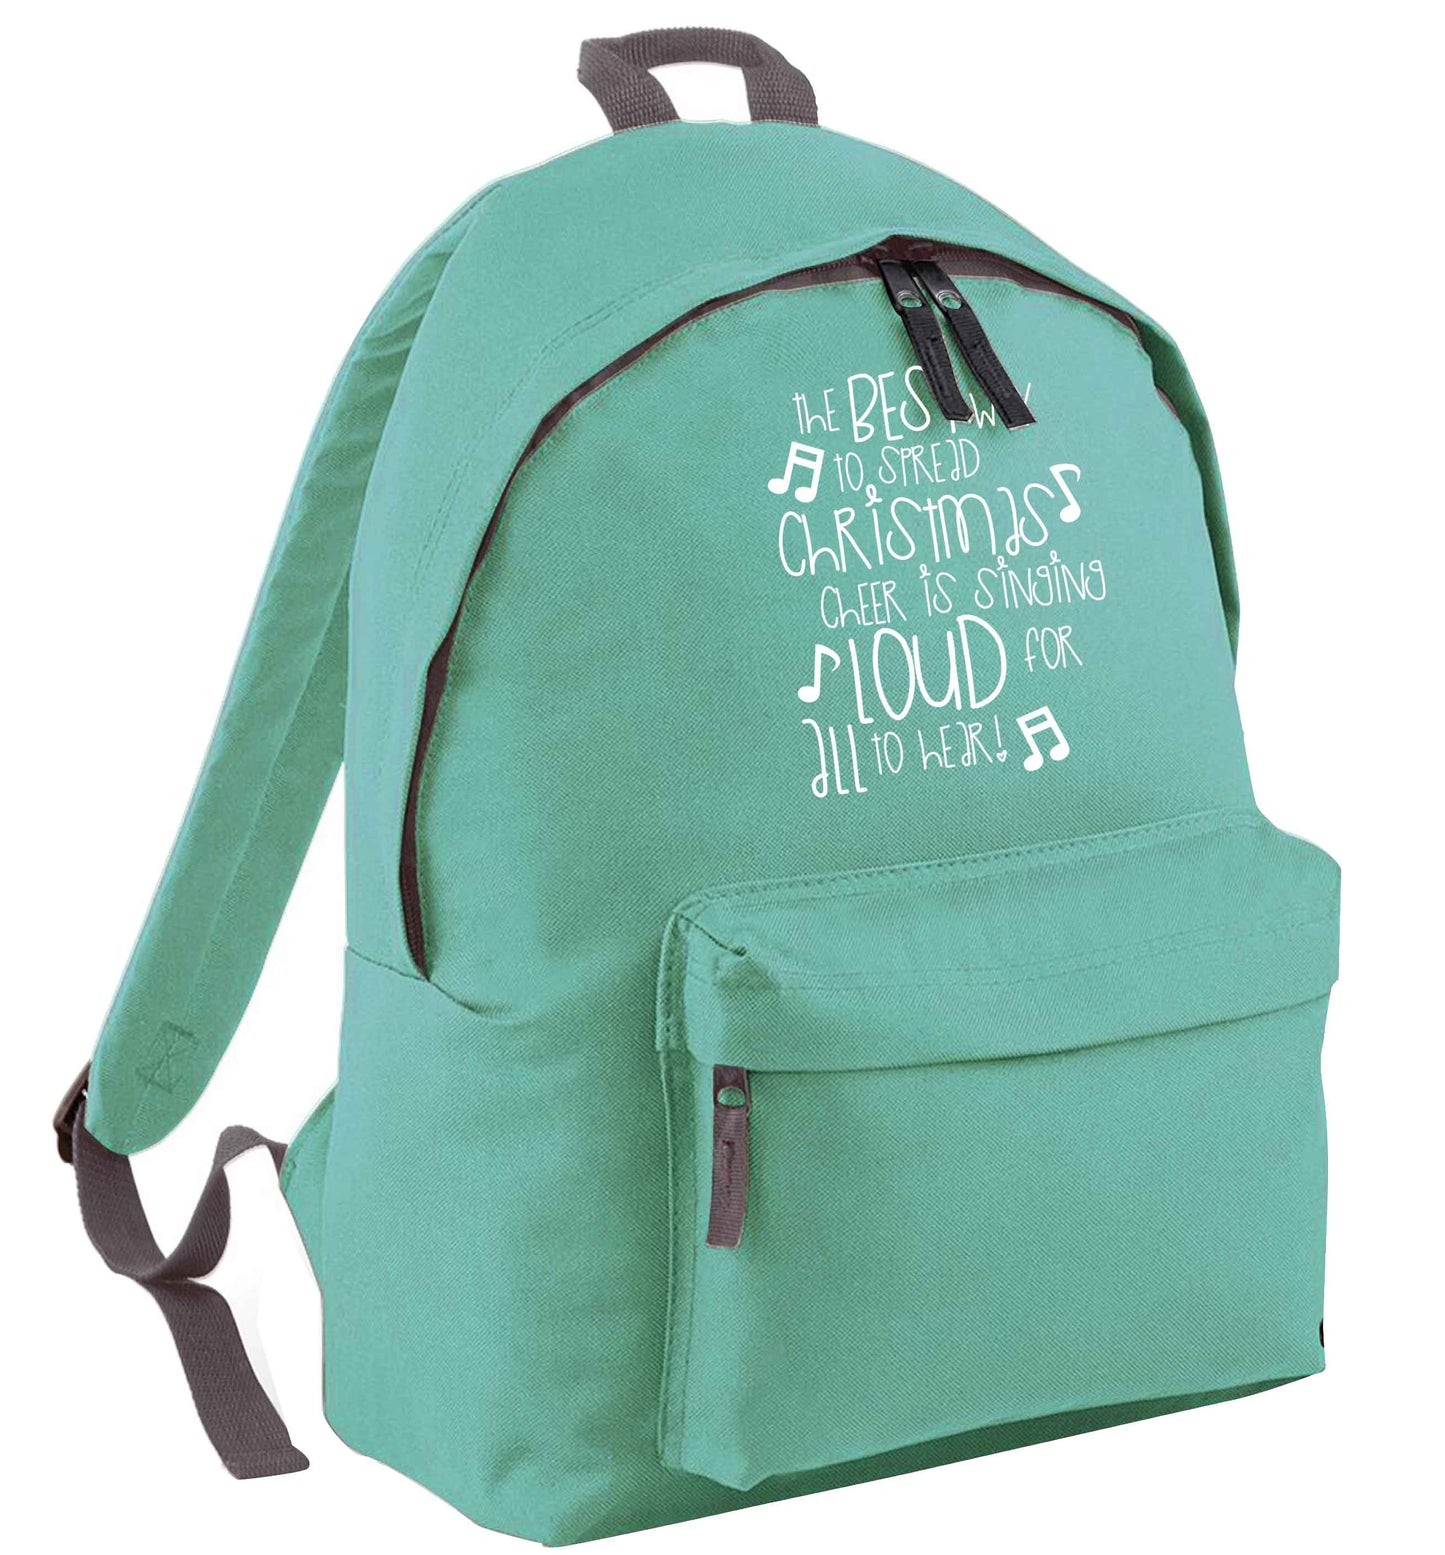 The best way to spread Christmas cheer is singing loud for all to hear mint adults backpack